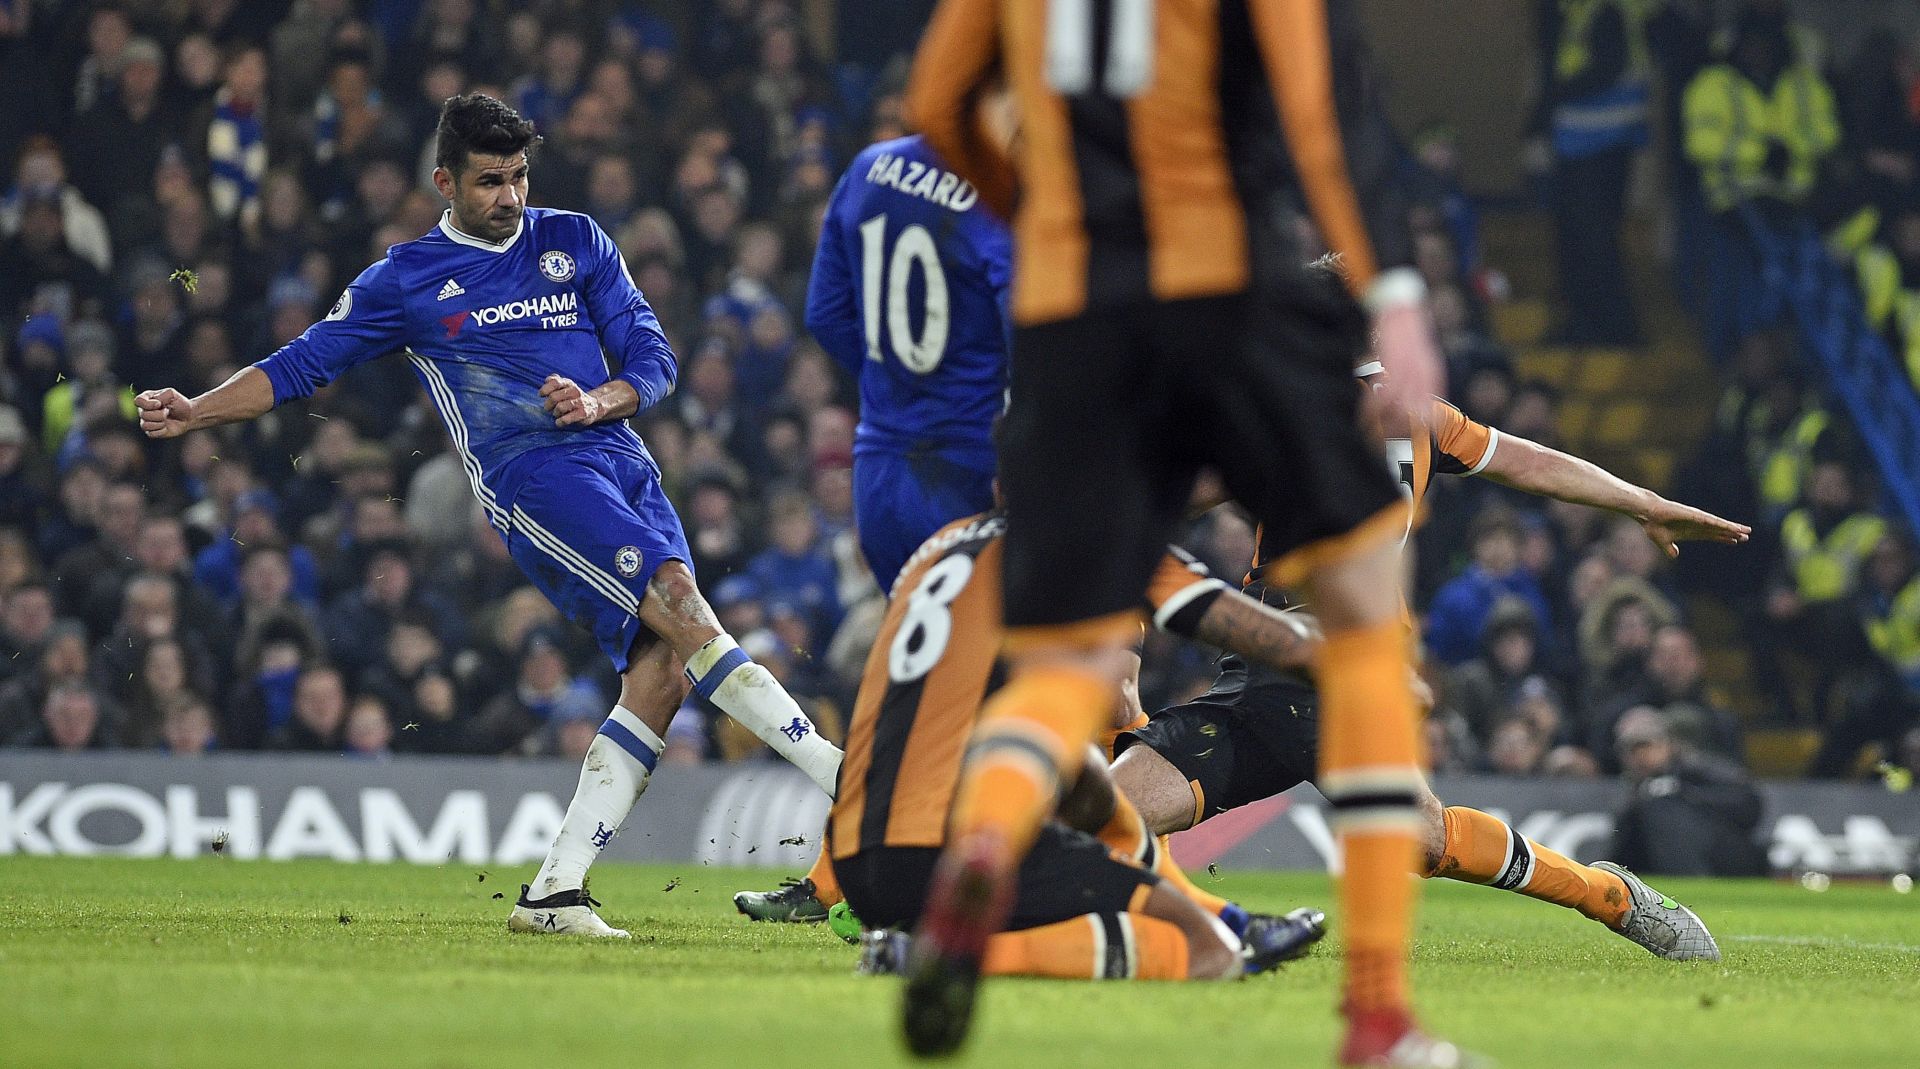 epa05742136 Chelsea's Diego Costa (L) scores their first goal against Hull City during the English Premier League soccer match between Chelsea FC and Hull City at Stamford Bridge, London, Britain, 22 January 2017. EDITORIAL USE ONLY. No use with unauthorized audio, video, data, fixture lists, club/league logos or 'live' services. Online in-match use limited to 75 images, no video emulation. No use in betting, games or single club/league/player publications  EPA/GERRY PENNY